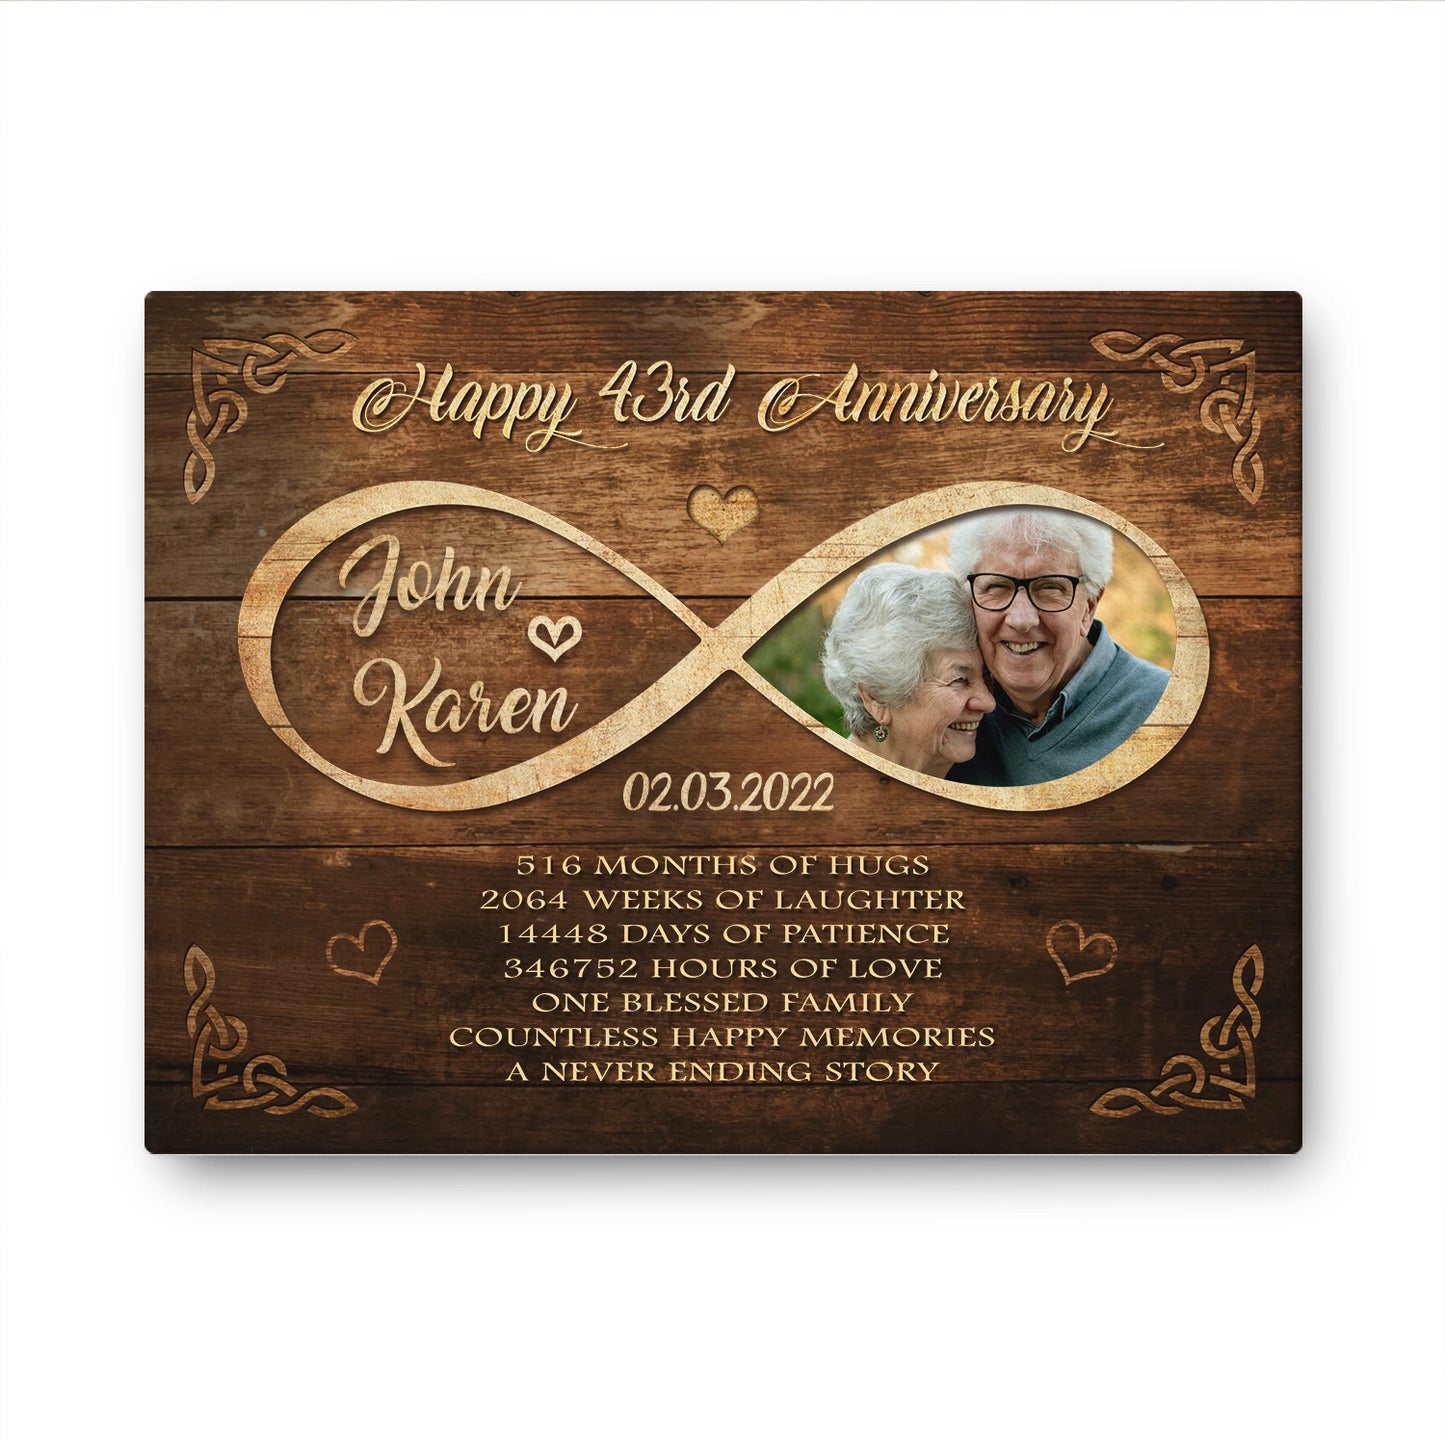 Happy 43rd Anniversary Old Television Anniversary Canvas Valentine Gifts